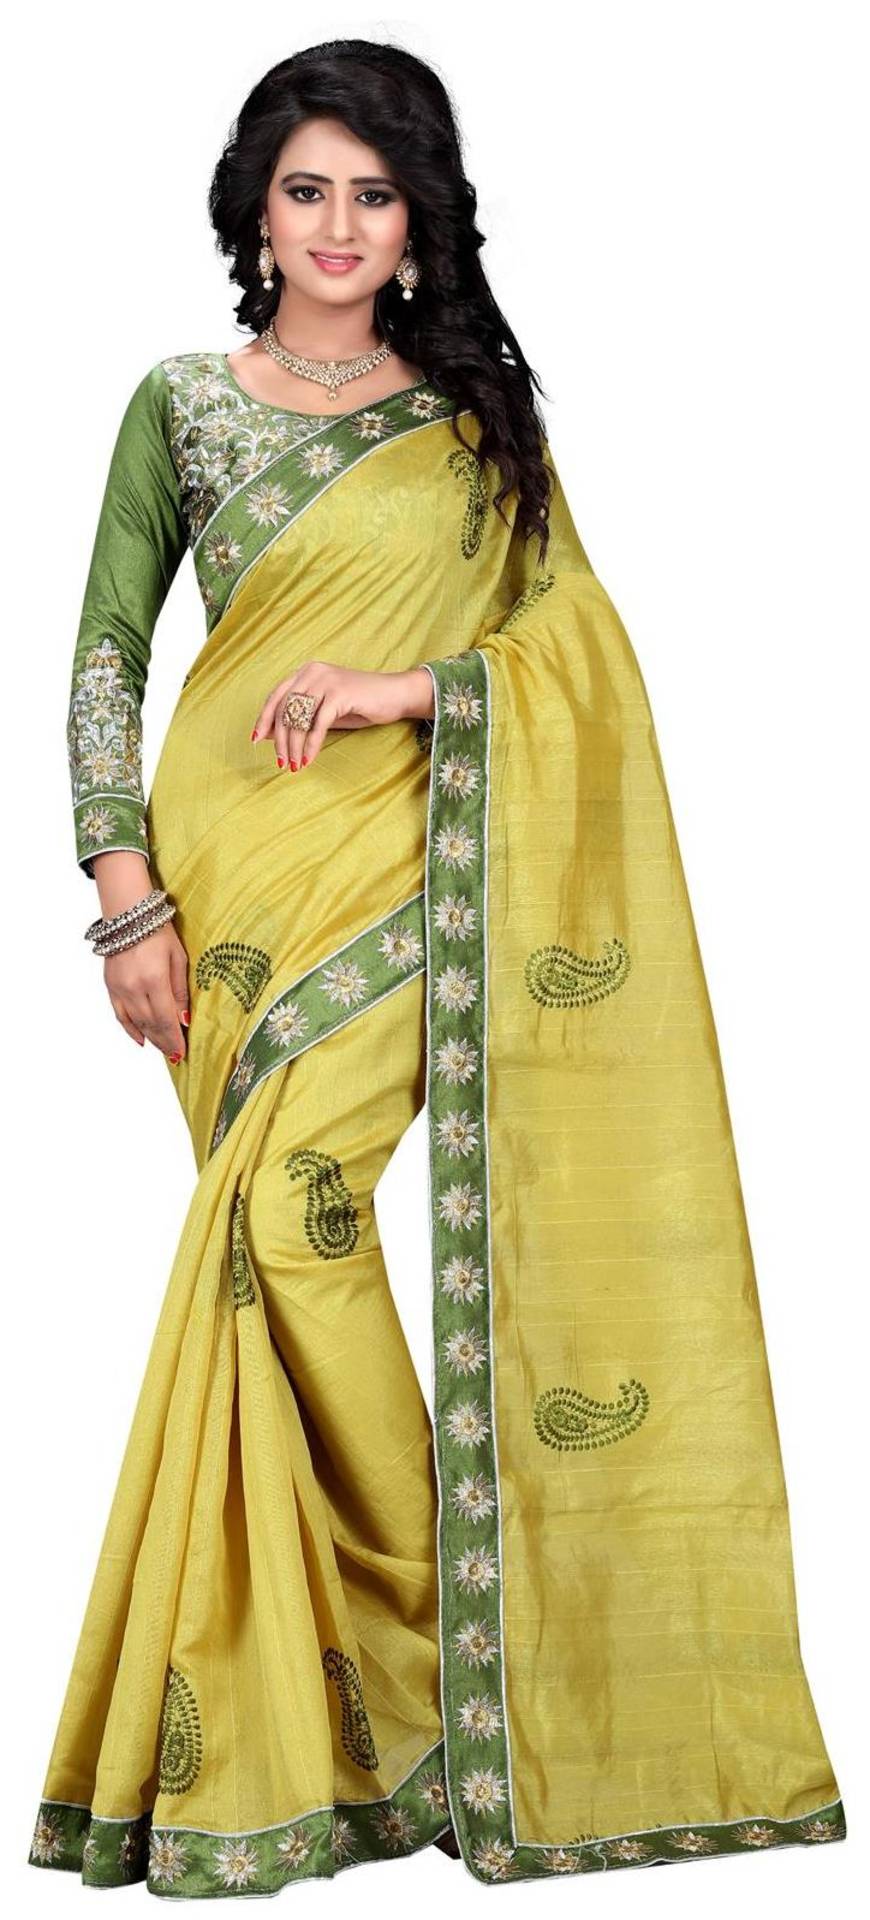 PaytmMall - Sarees Buy 1 Get 2 Free After Cashback